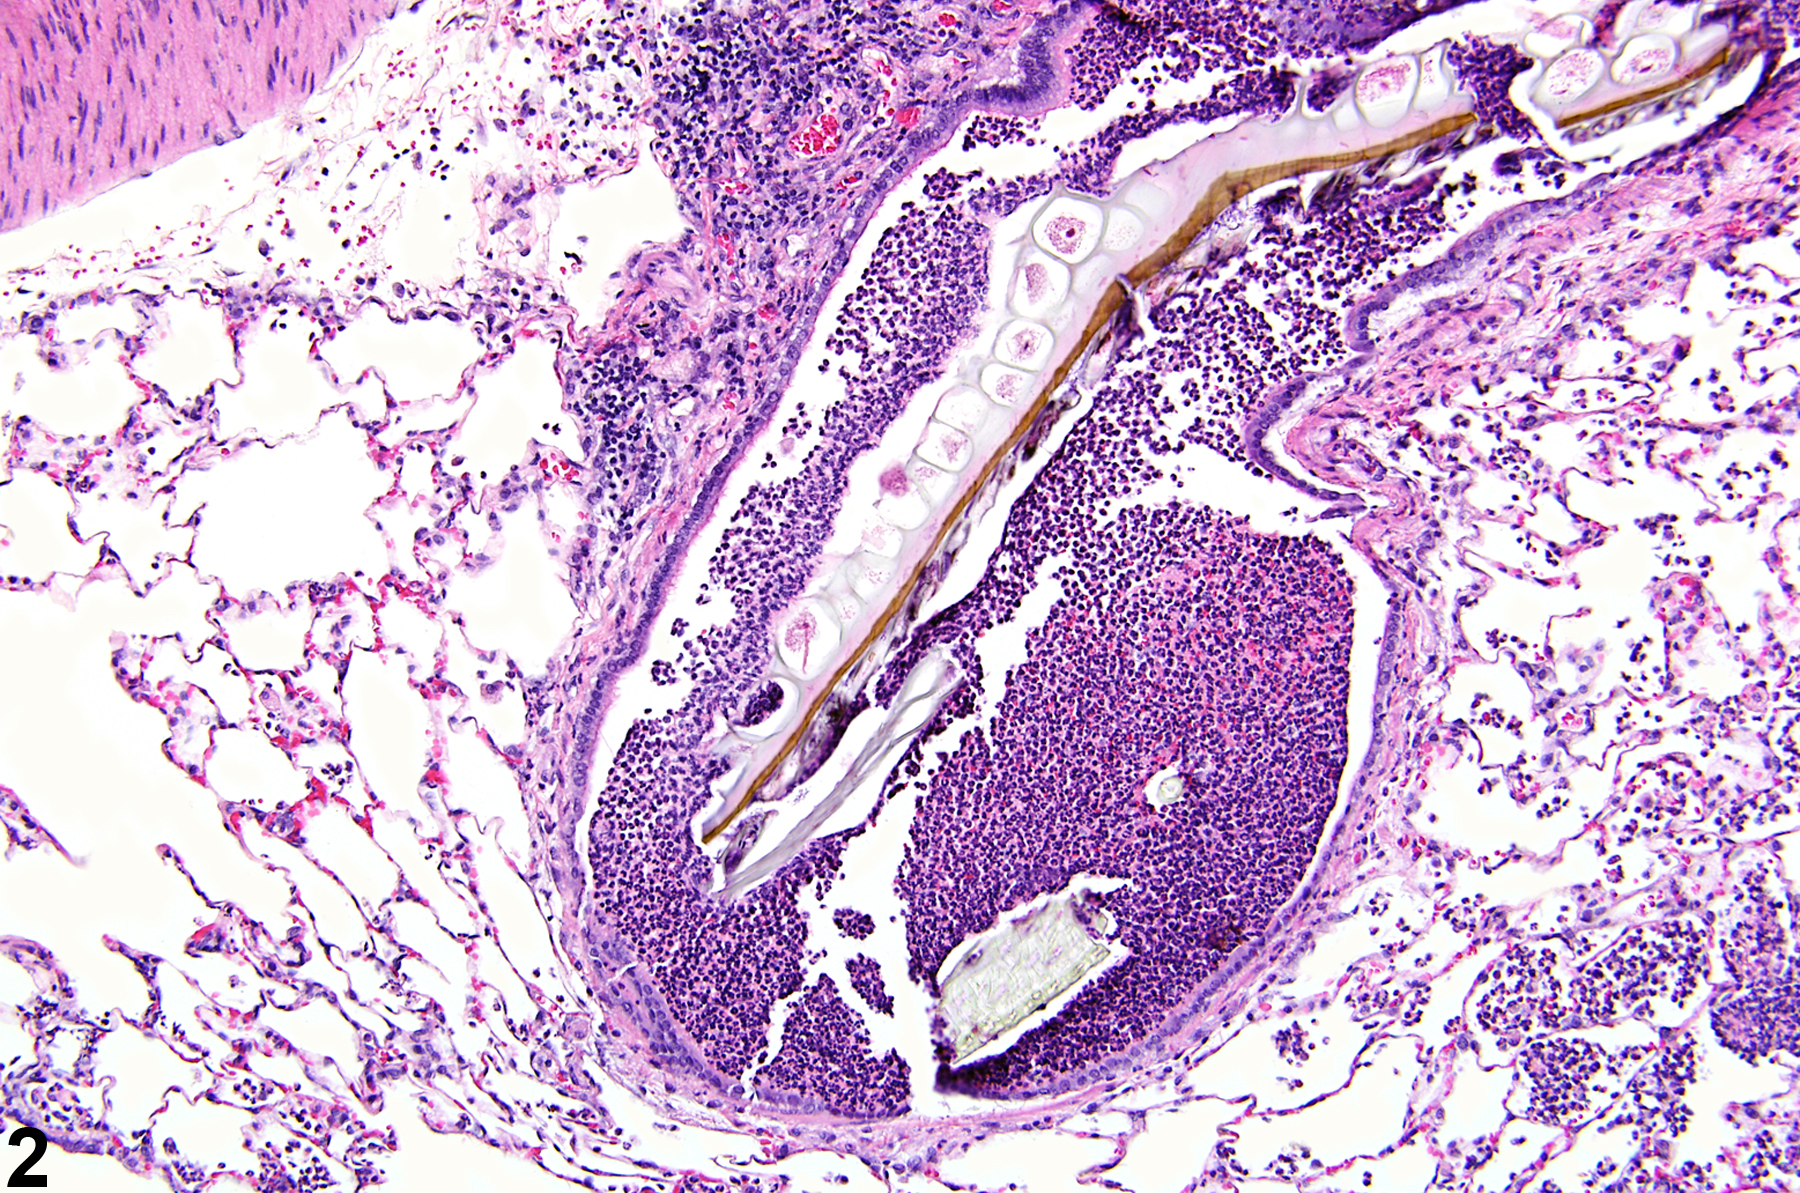 Image of foreign body in the lung from a male Harlan Sprague-Dawley rat in a chronic study